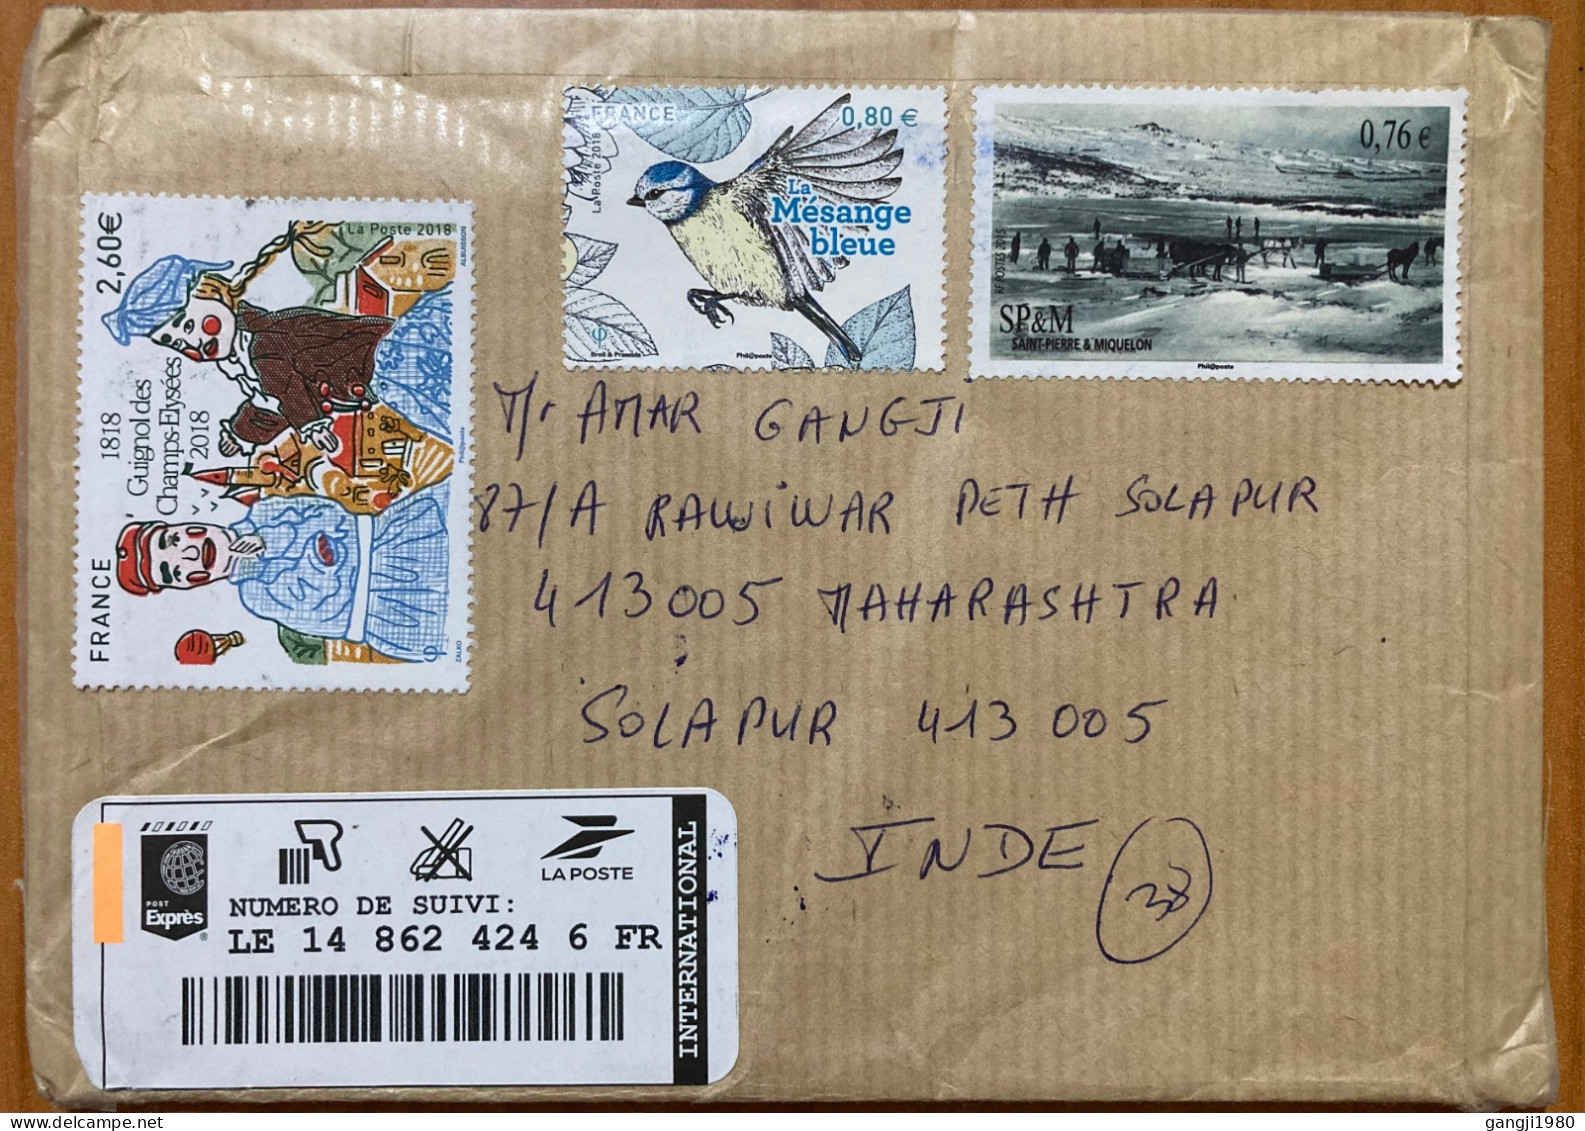 FRANCE SP&M COMBO 2024, COVER USED TO INDIA, EXPRESS LABEL, 2015 TRANSPORT, 2018 BIRD, PUPPET THEATRE, GUIGNOL DES CHAMP - Covers & Documents